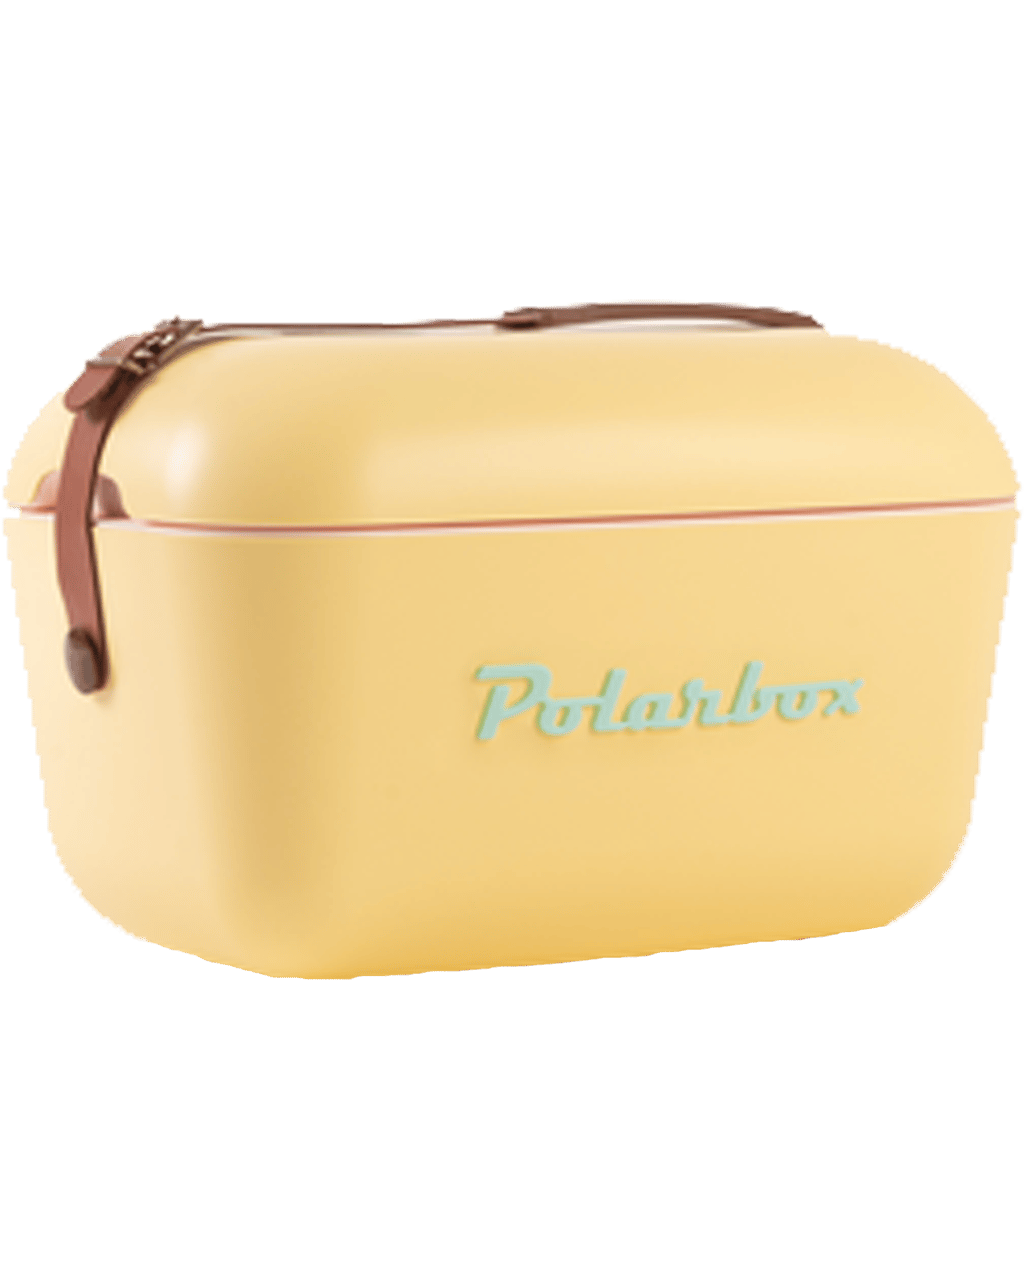 Buy Polarbox Classic Yellow Cooler Box 20l Online (Lowest Price ...